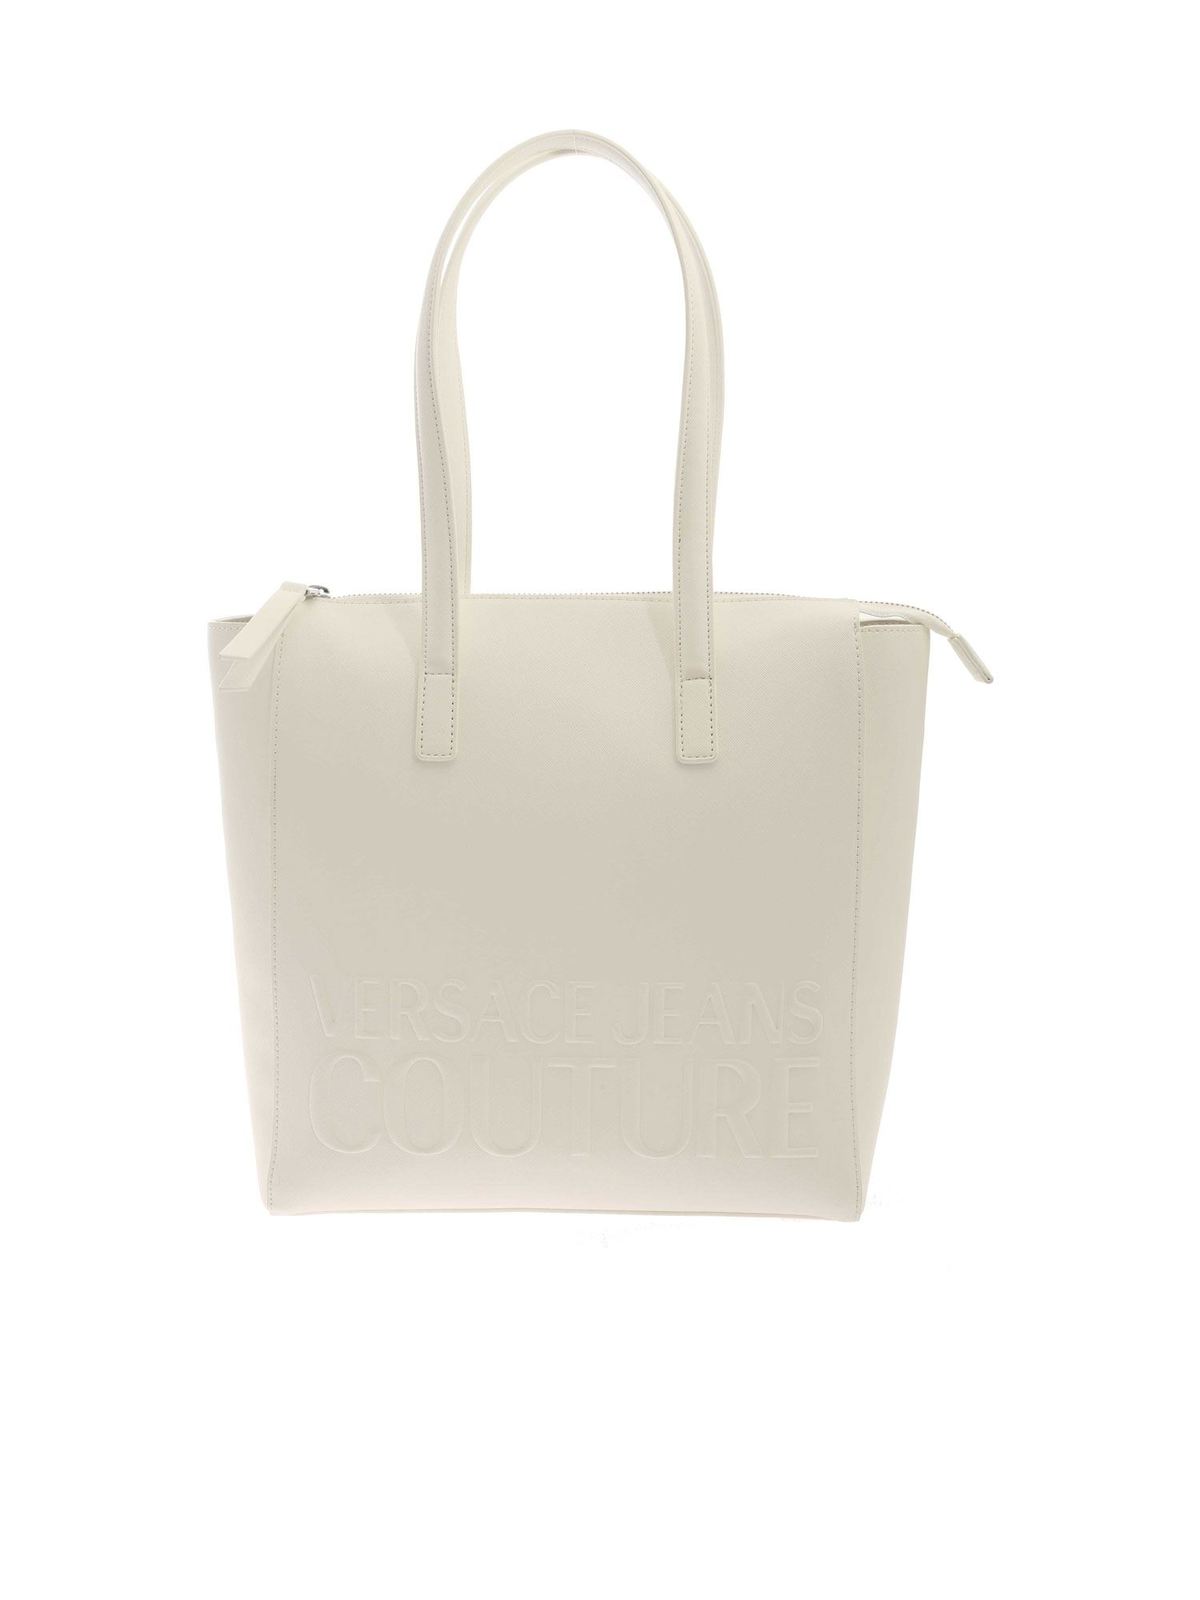 VERSACE JEANS COUTURE BRANDED SHOPPER BAG